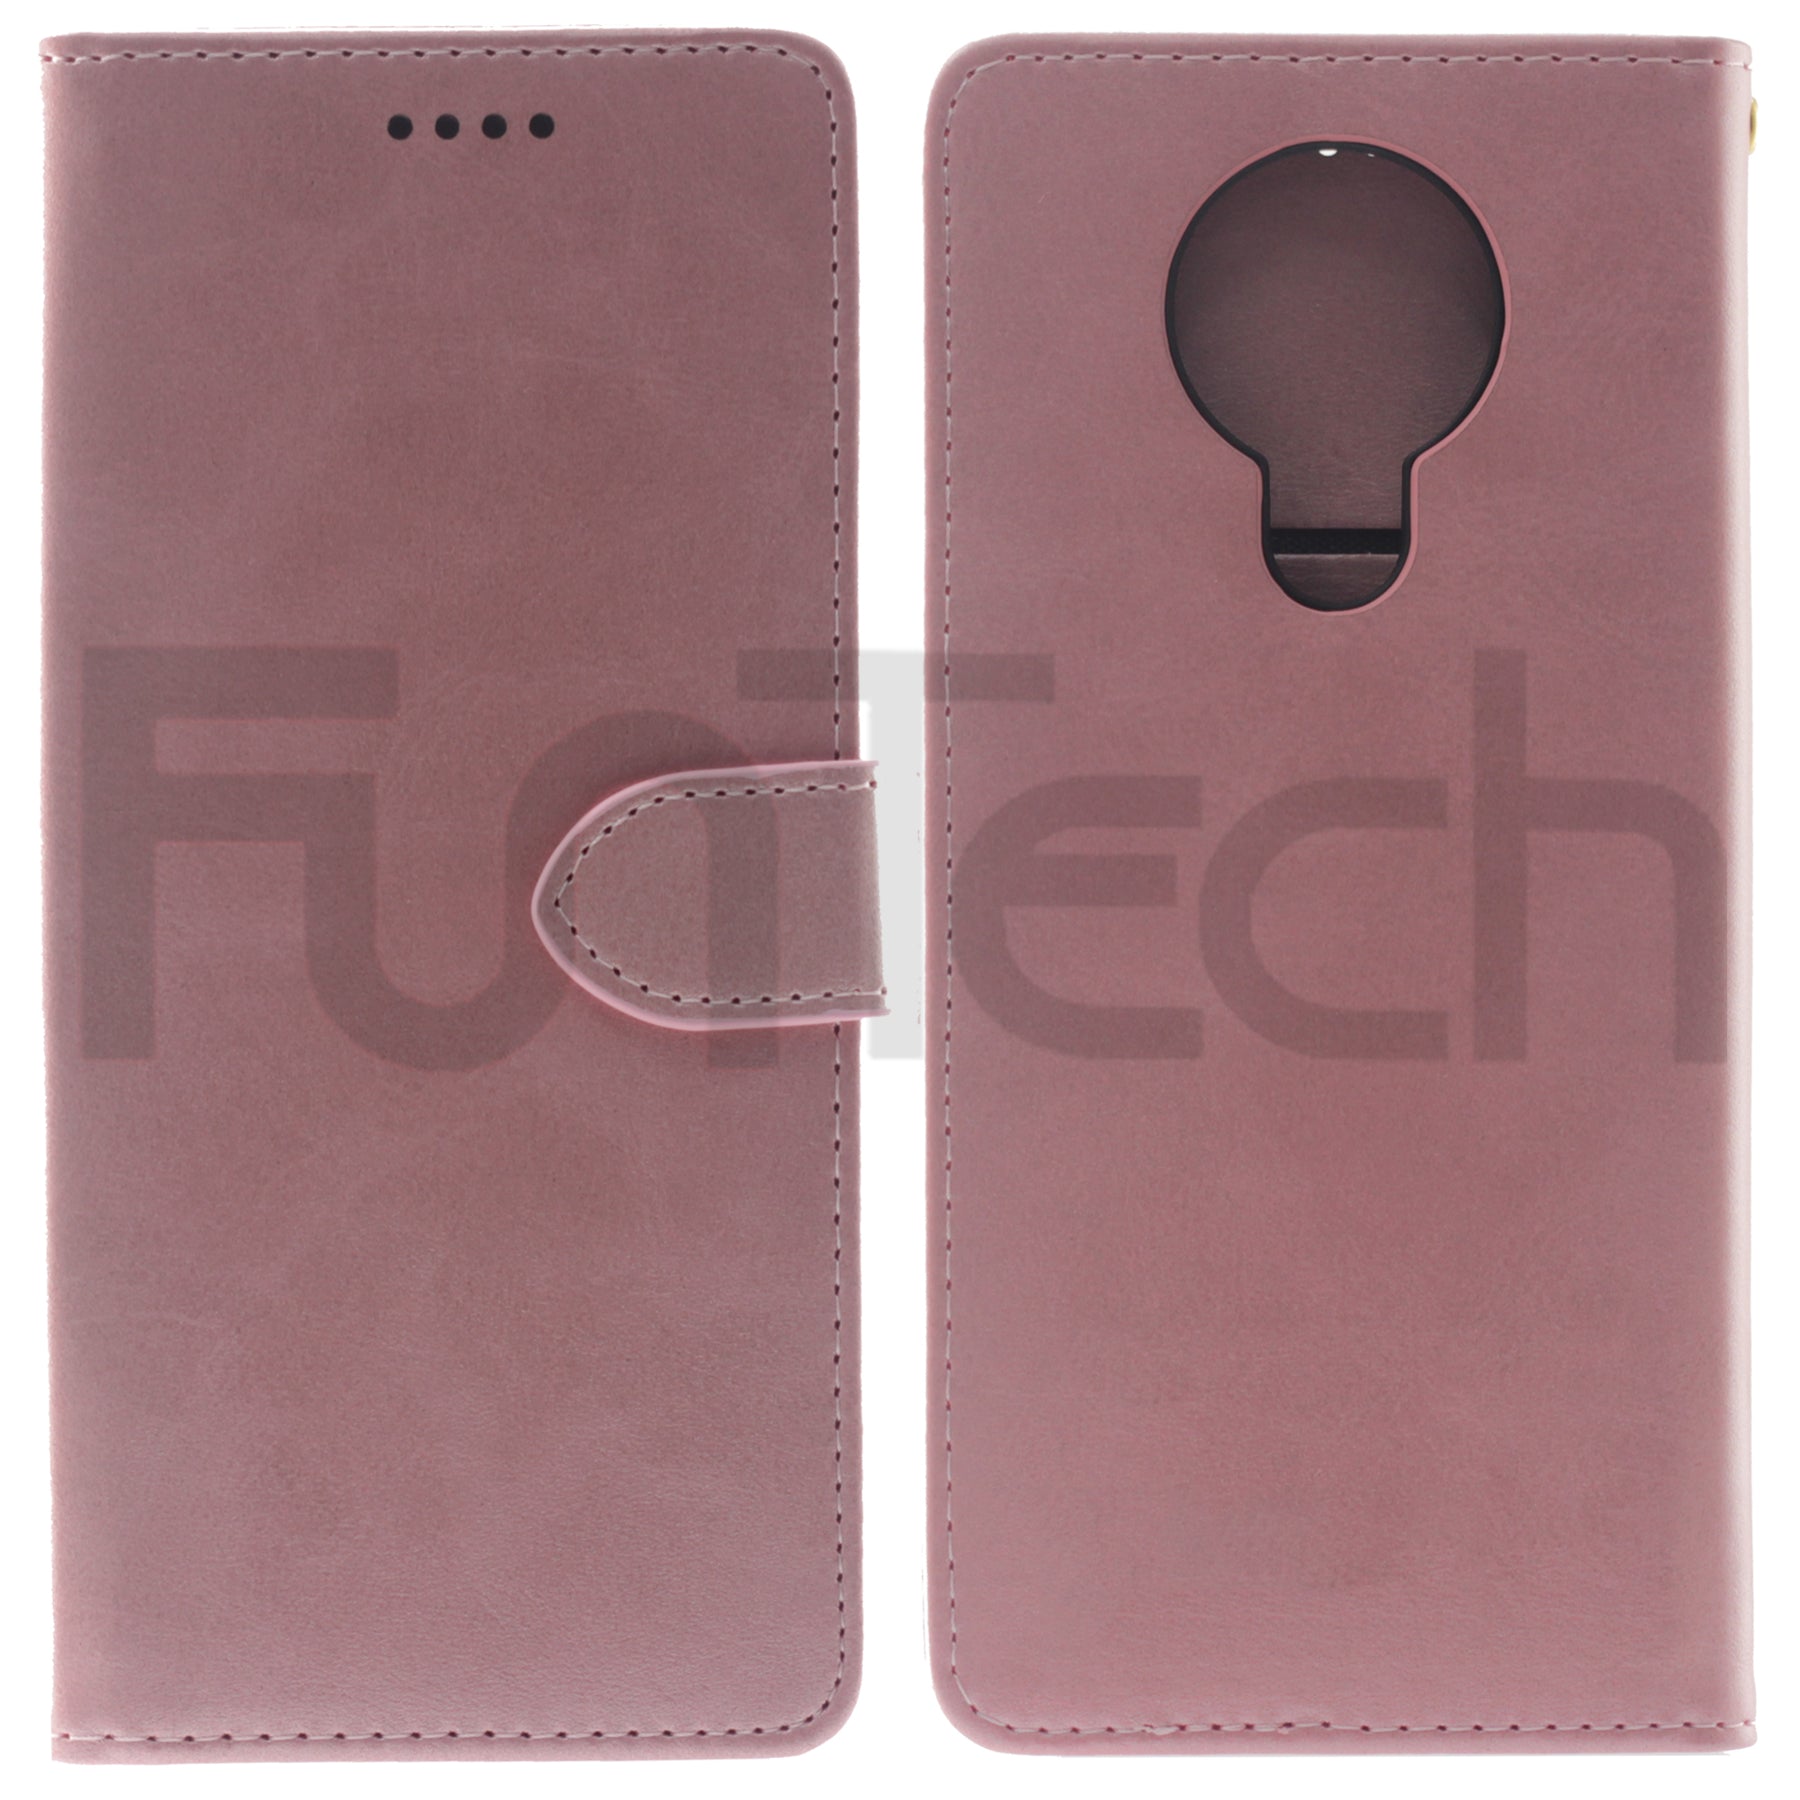 Nokia 5.3, Leather Wallet Case, Color Pink.